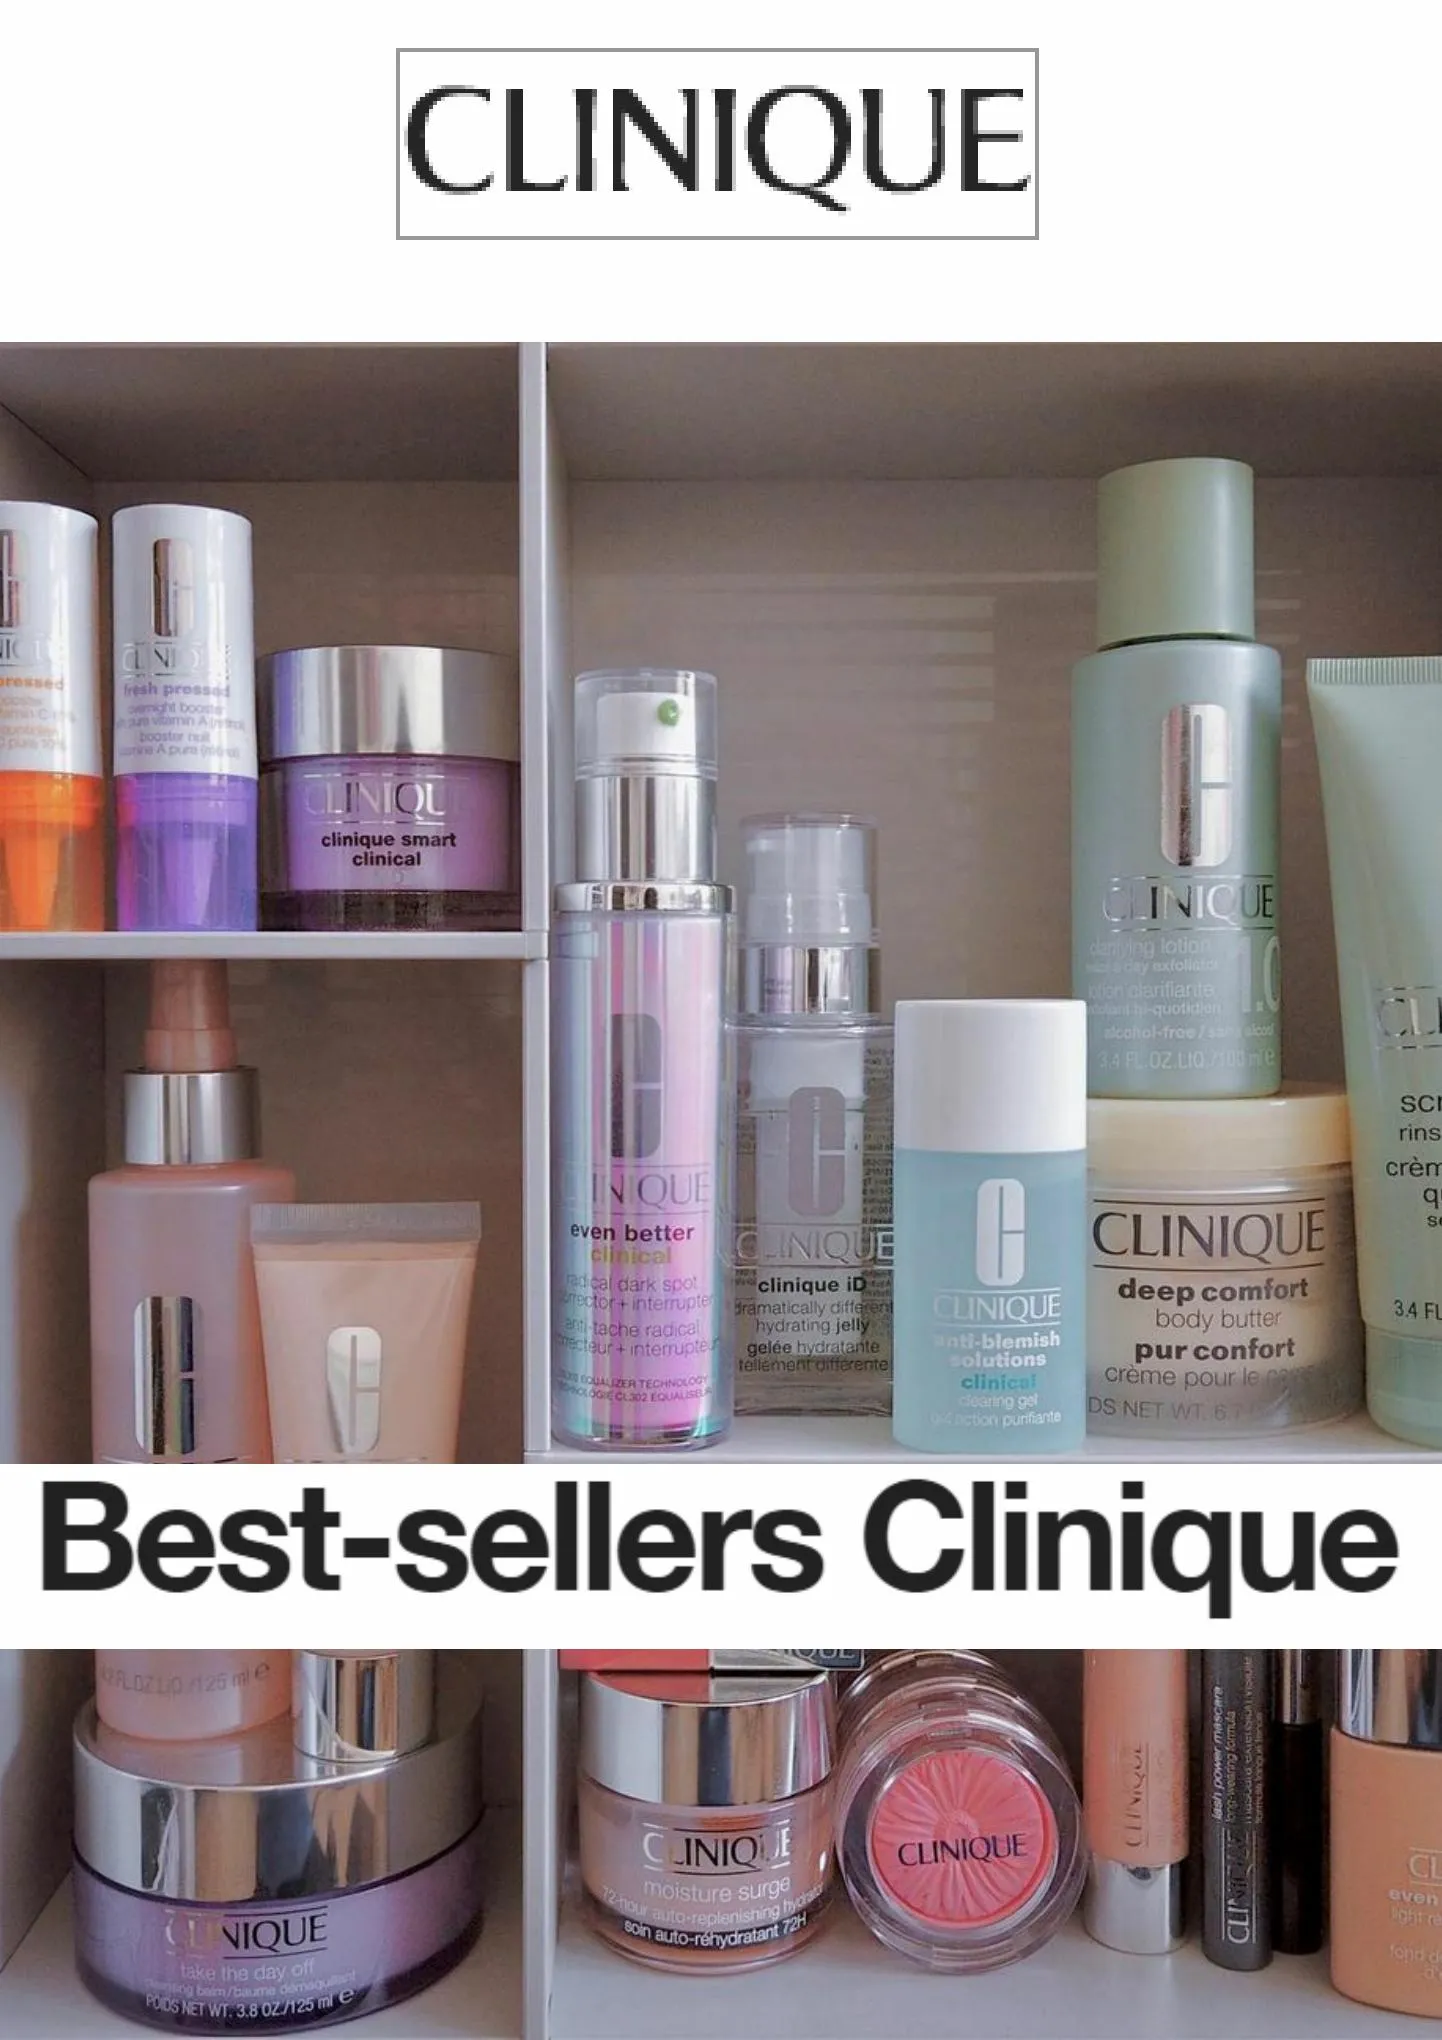 Catalogue Best-sellers Clinique, page 00001